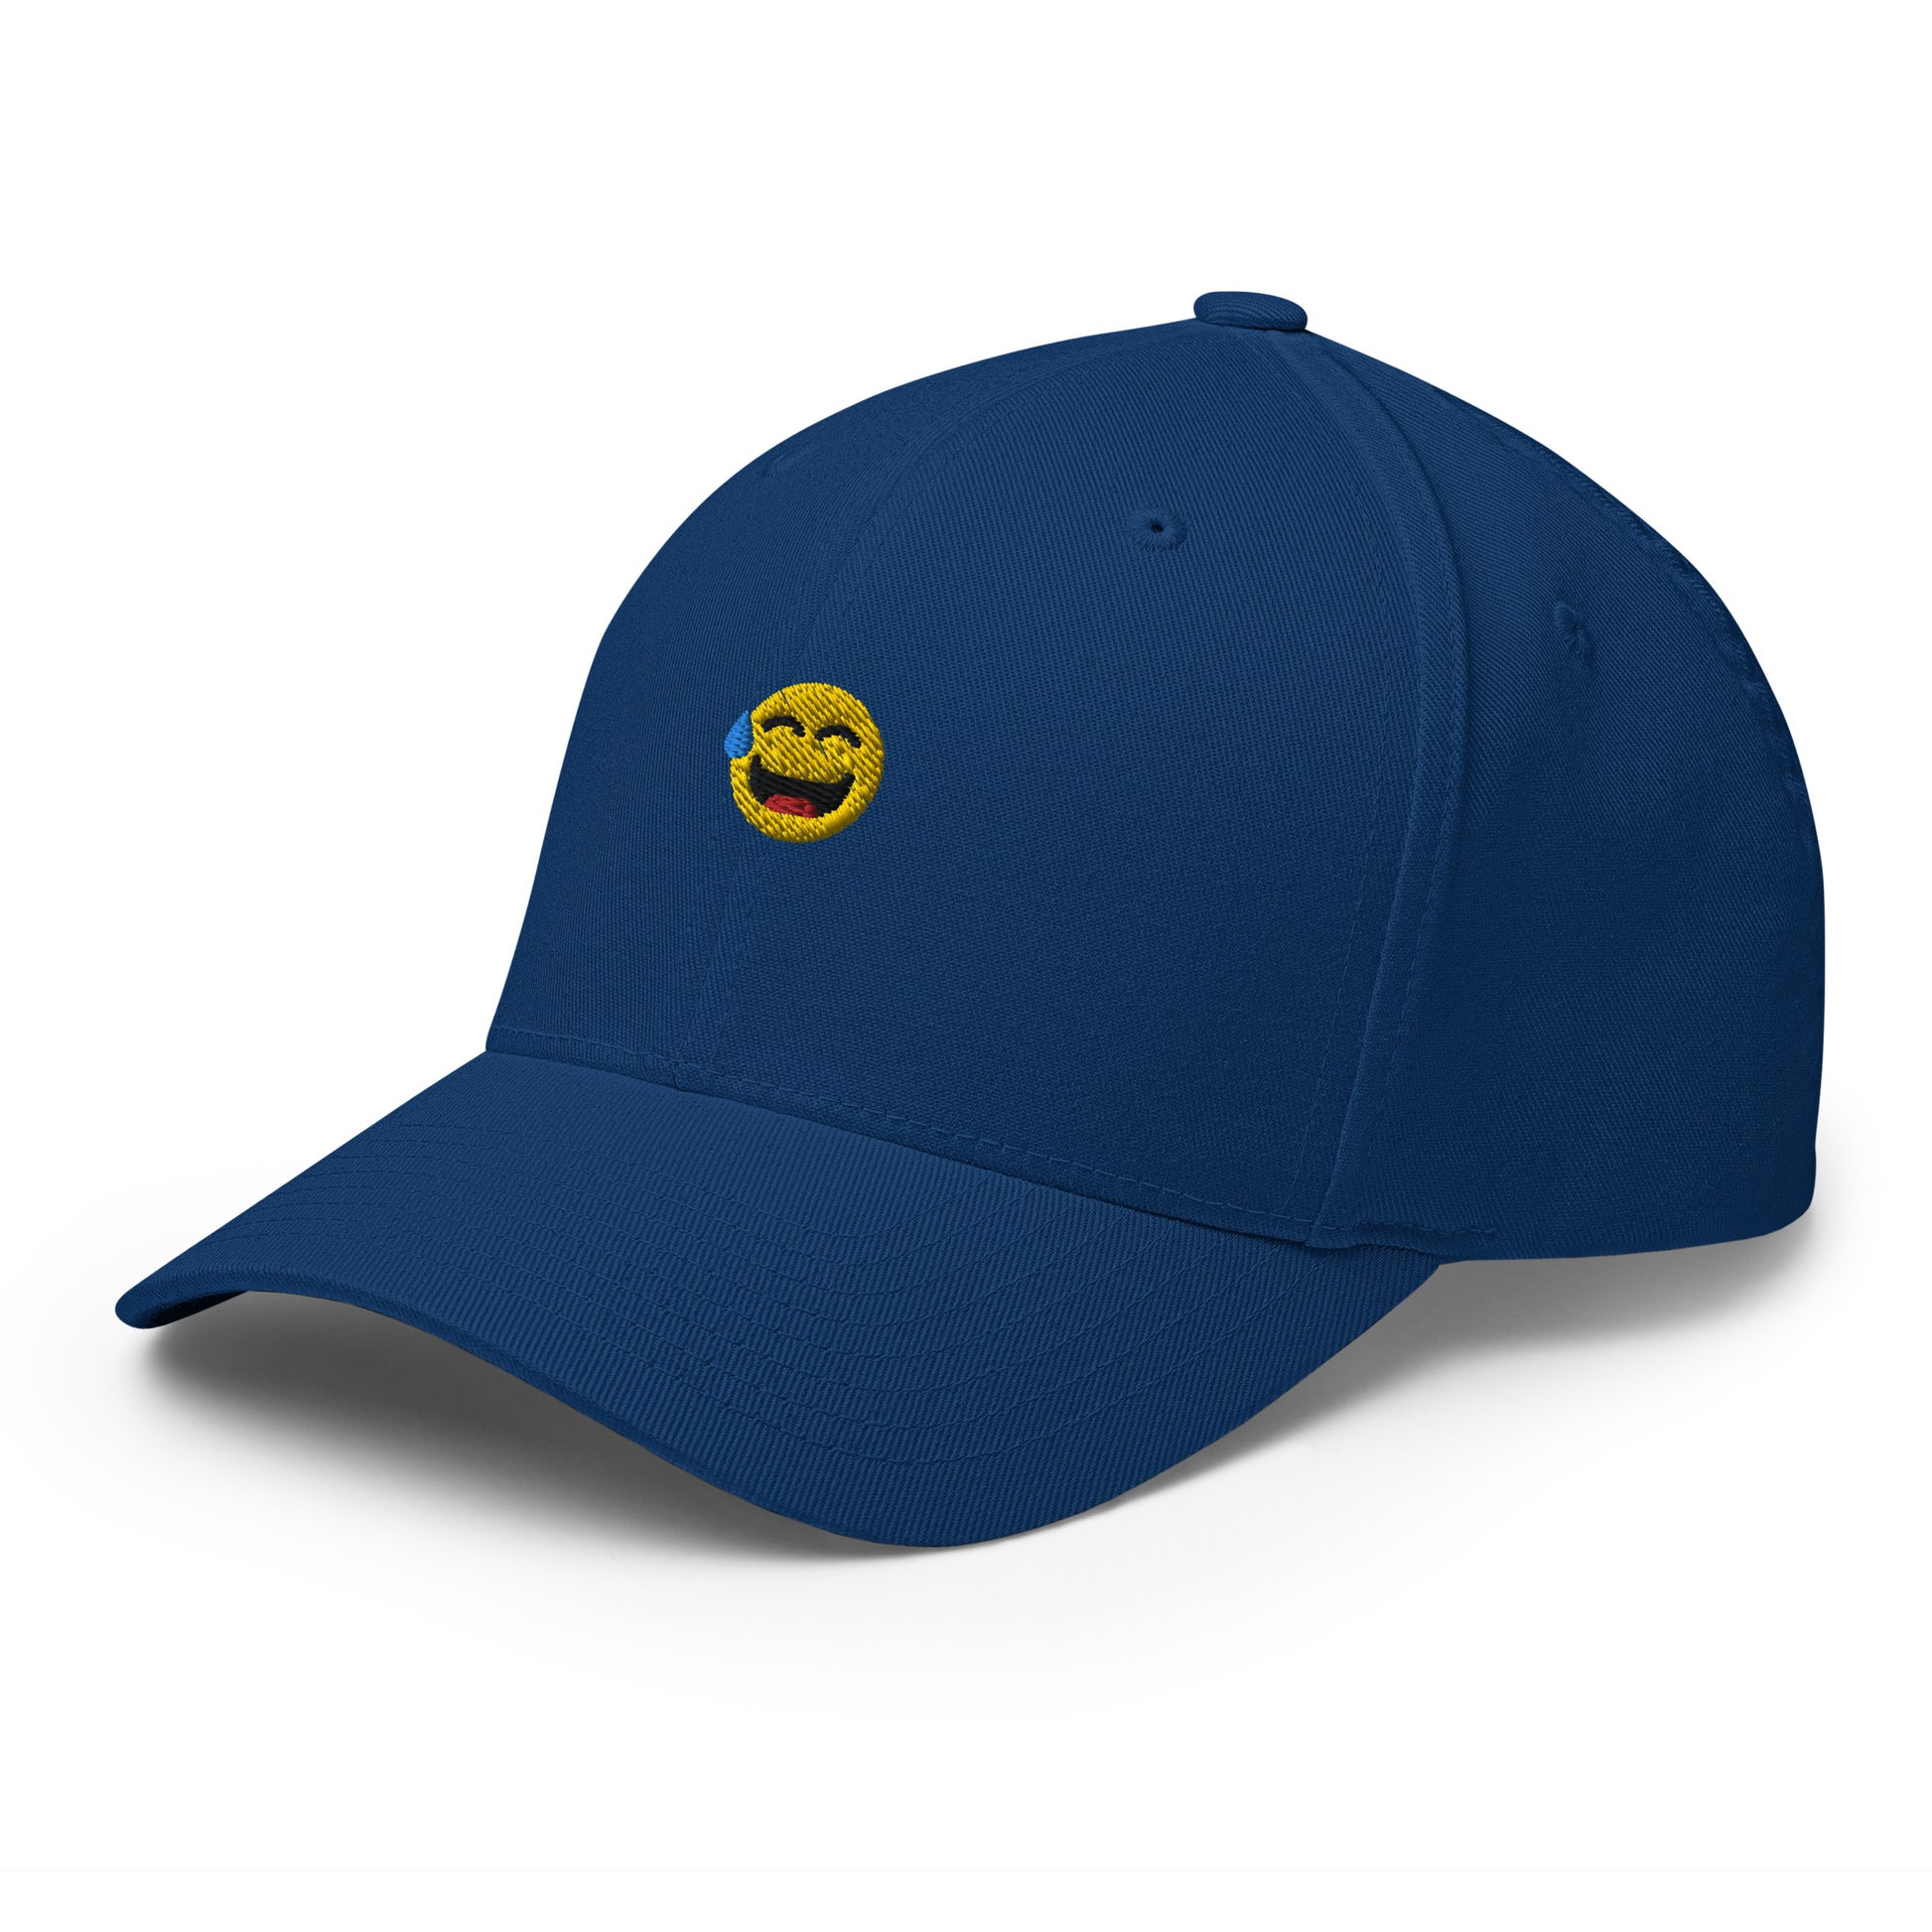 cap-from-the-front-with-emoji-symbol